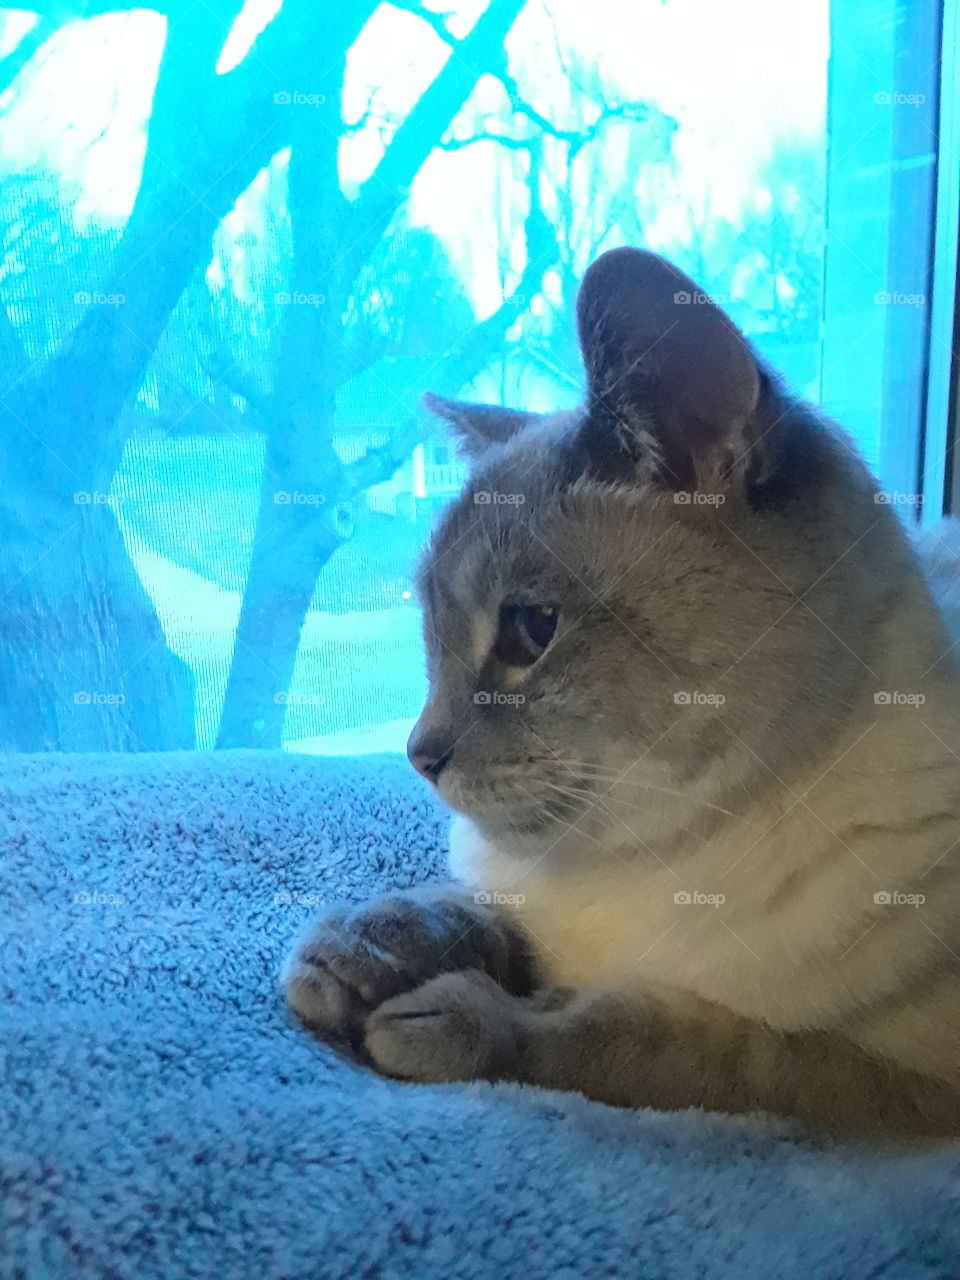 Siamese Tabby Cat relaxing in the window Gray blanket and blue window with bright background monochrome blue Gray and White